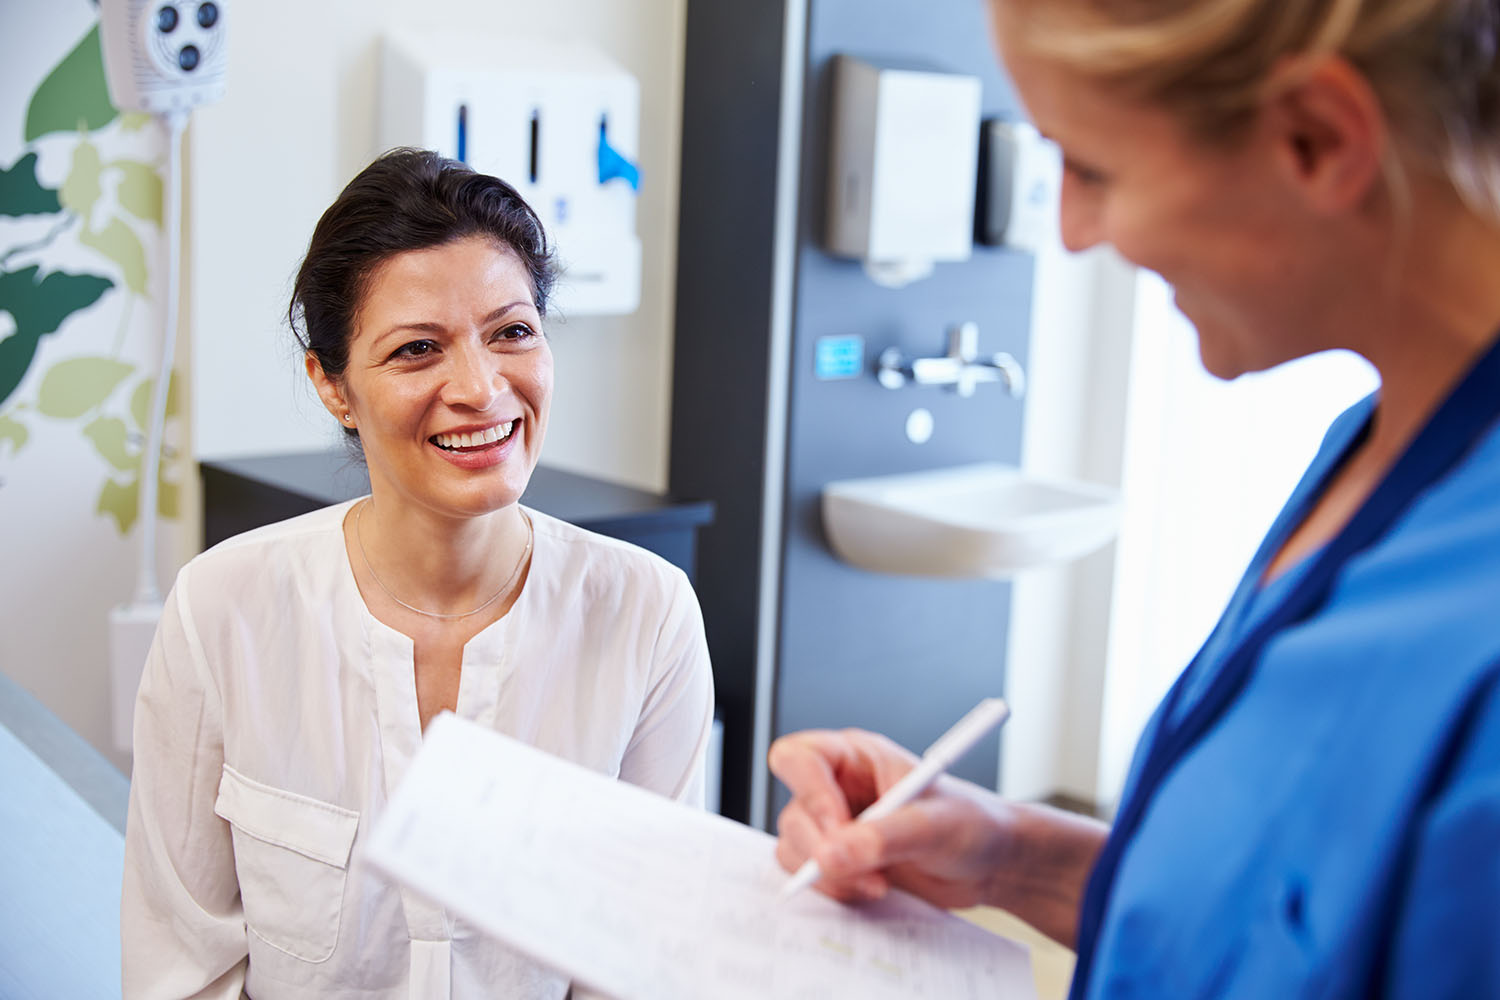 Dermatology patient smiling at doctor